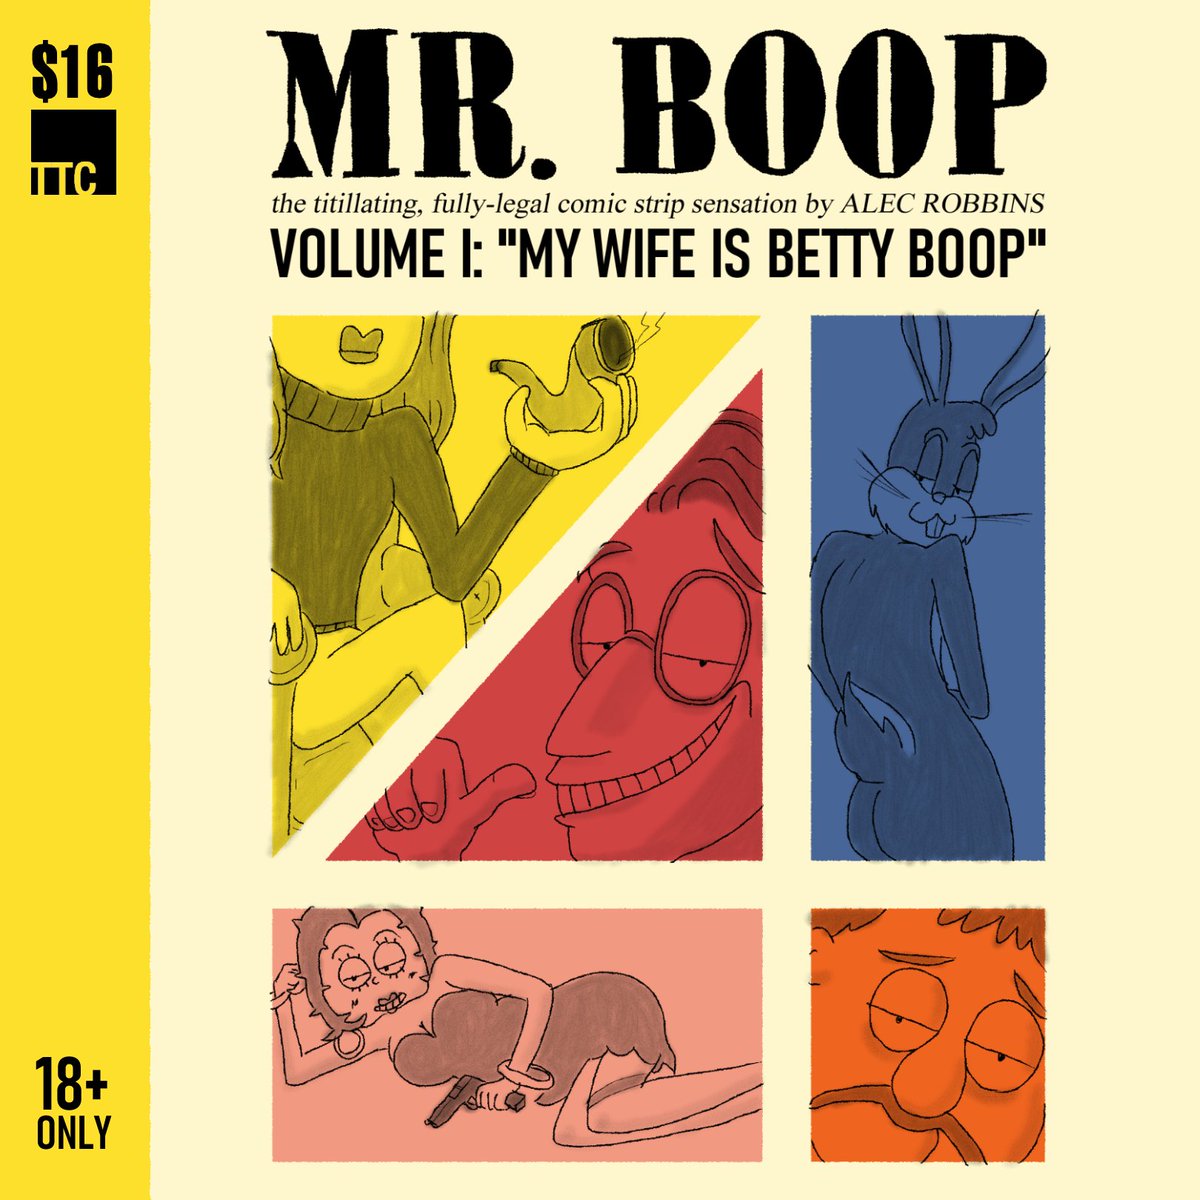 The MR. BOOP ZINE: VOLUME I is up for pre-order NOW!!!PRE-ORDER:  http://gum.co/mrboop $16, ~70 pages, includes the first 52 Mr. Boop strips, exclusive book-only material, and ~lots~ of guest strips from some of my ~favorite~ artists (TBA!)All hand-printed via Riso by me!!